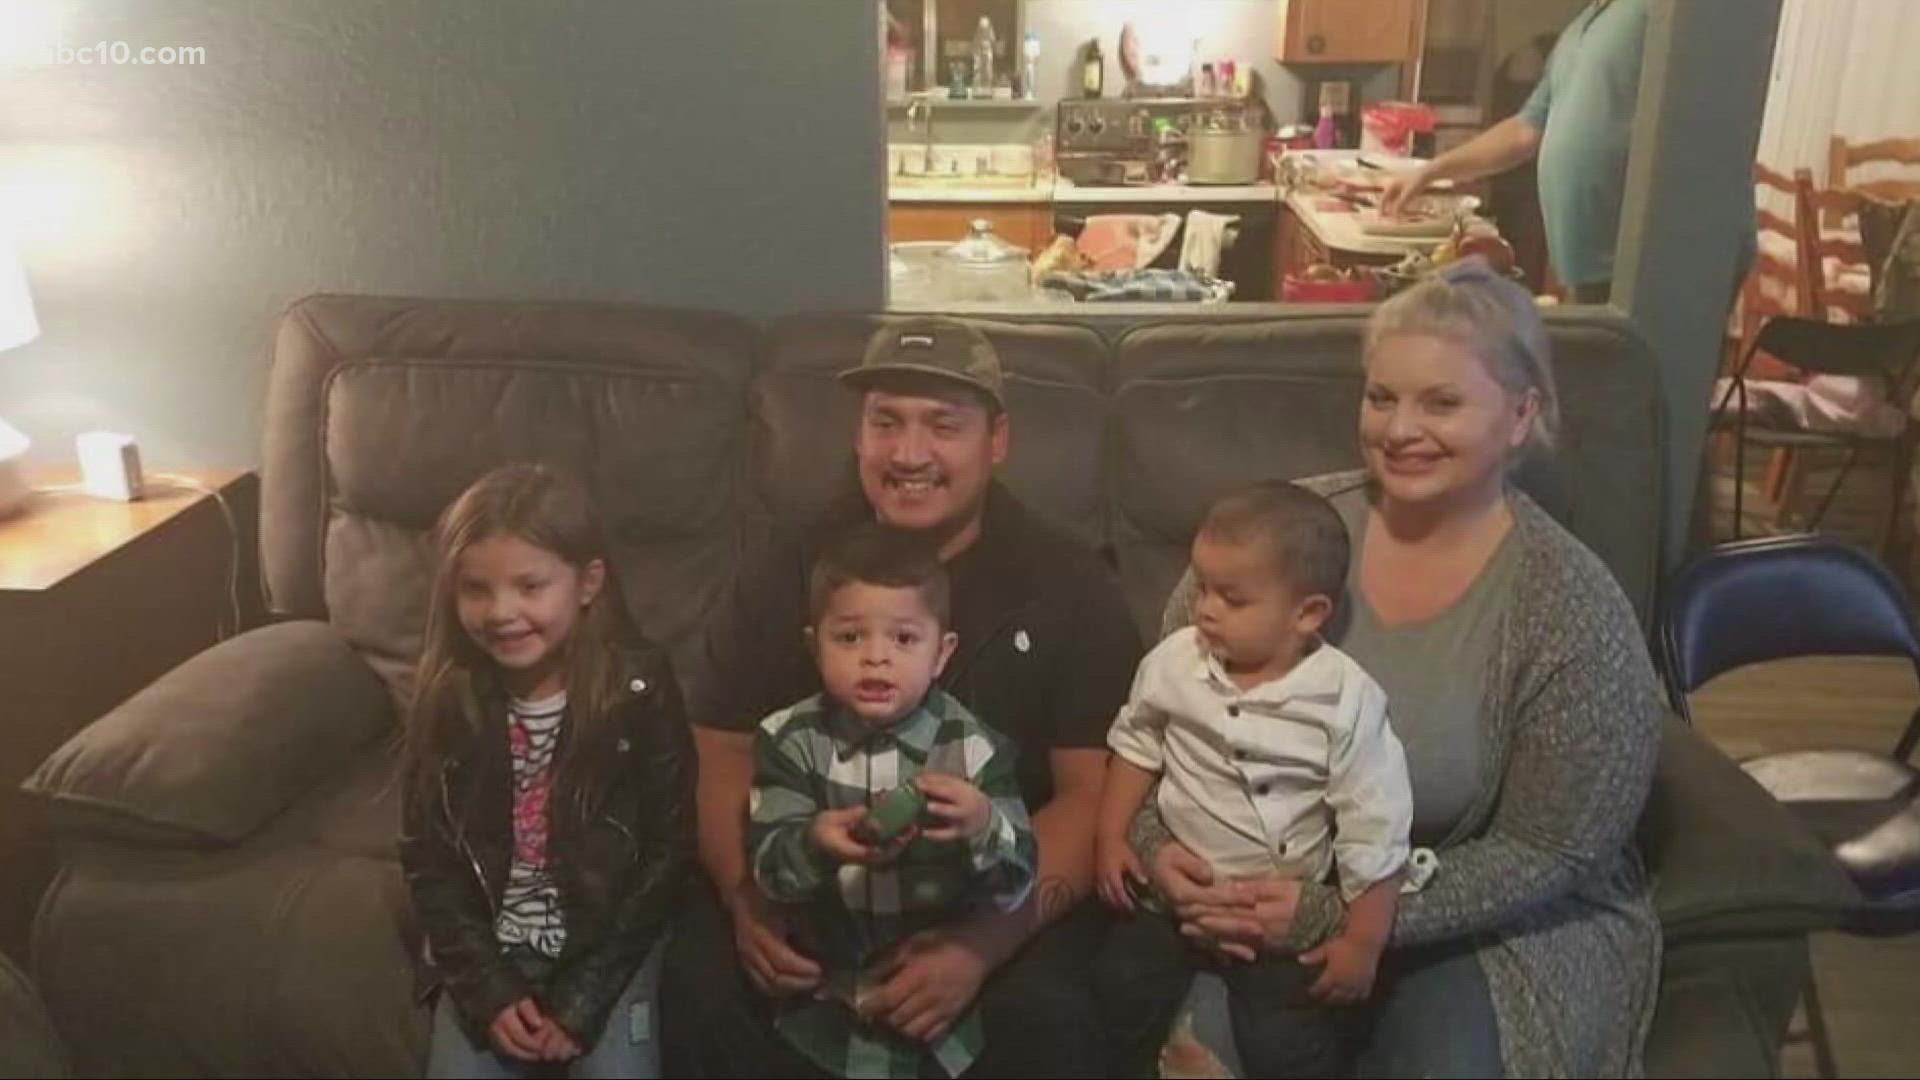 An attorney for 4-year-old Julian Montano said the crime is being investigated, and it's become an immense insult to injury as the family was killed just recently.